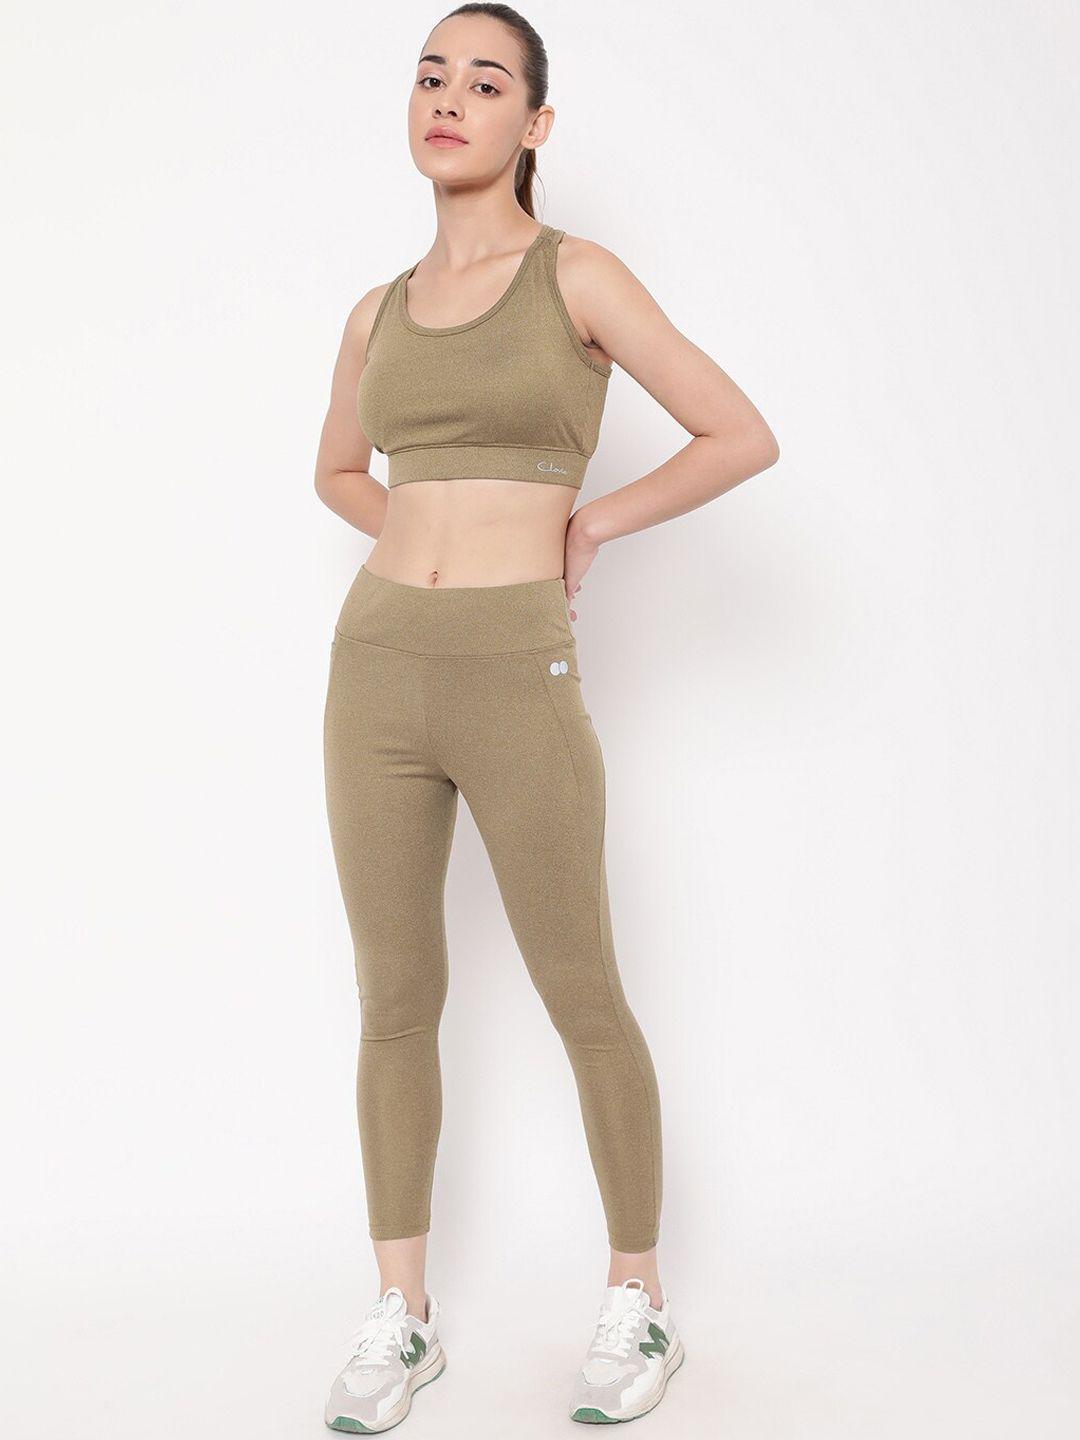 clovia olive green padded sports bra & high-rise ankle tights set with side pocket